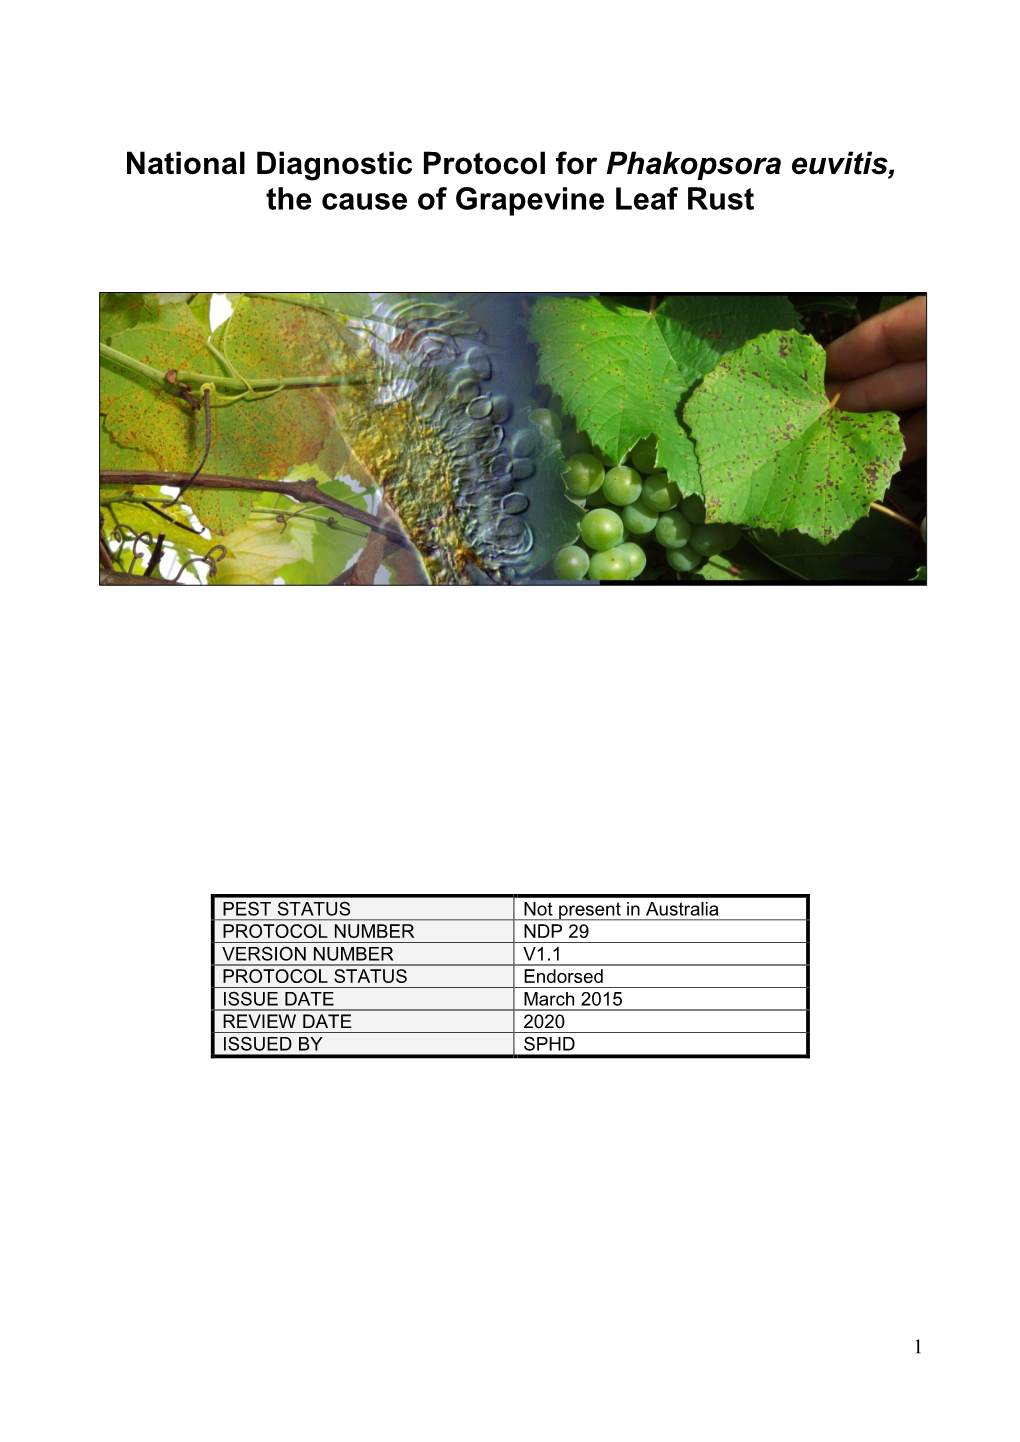 National Diagnostic Protocol for Phakopsora Euvitis, the Cause of Grapevine Leaf Rust